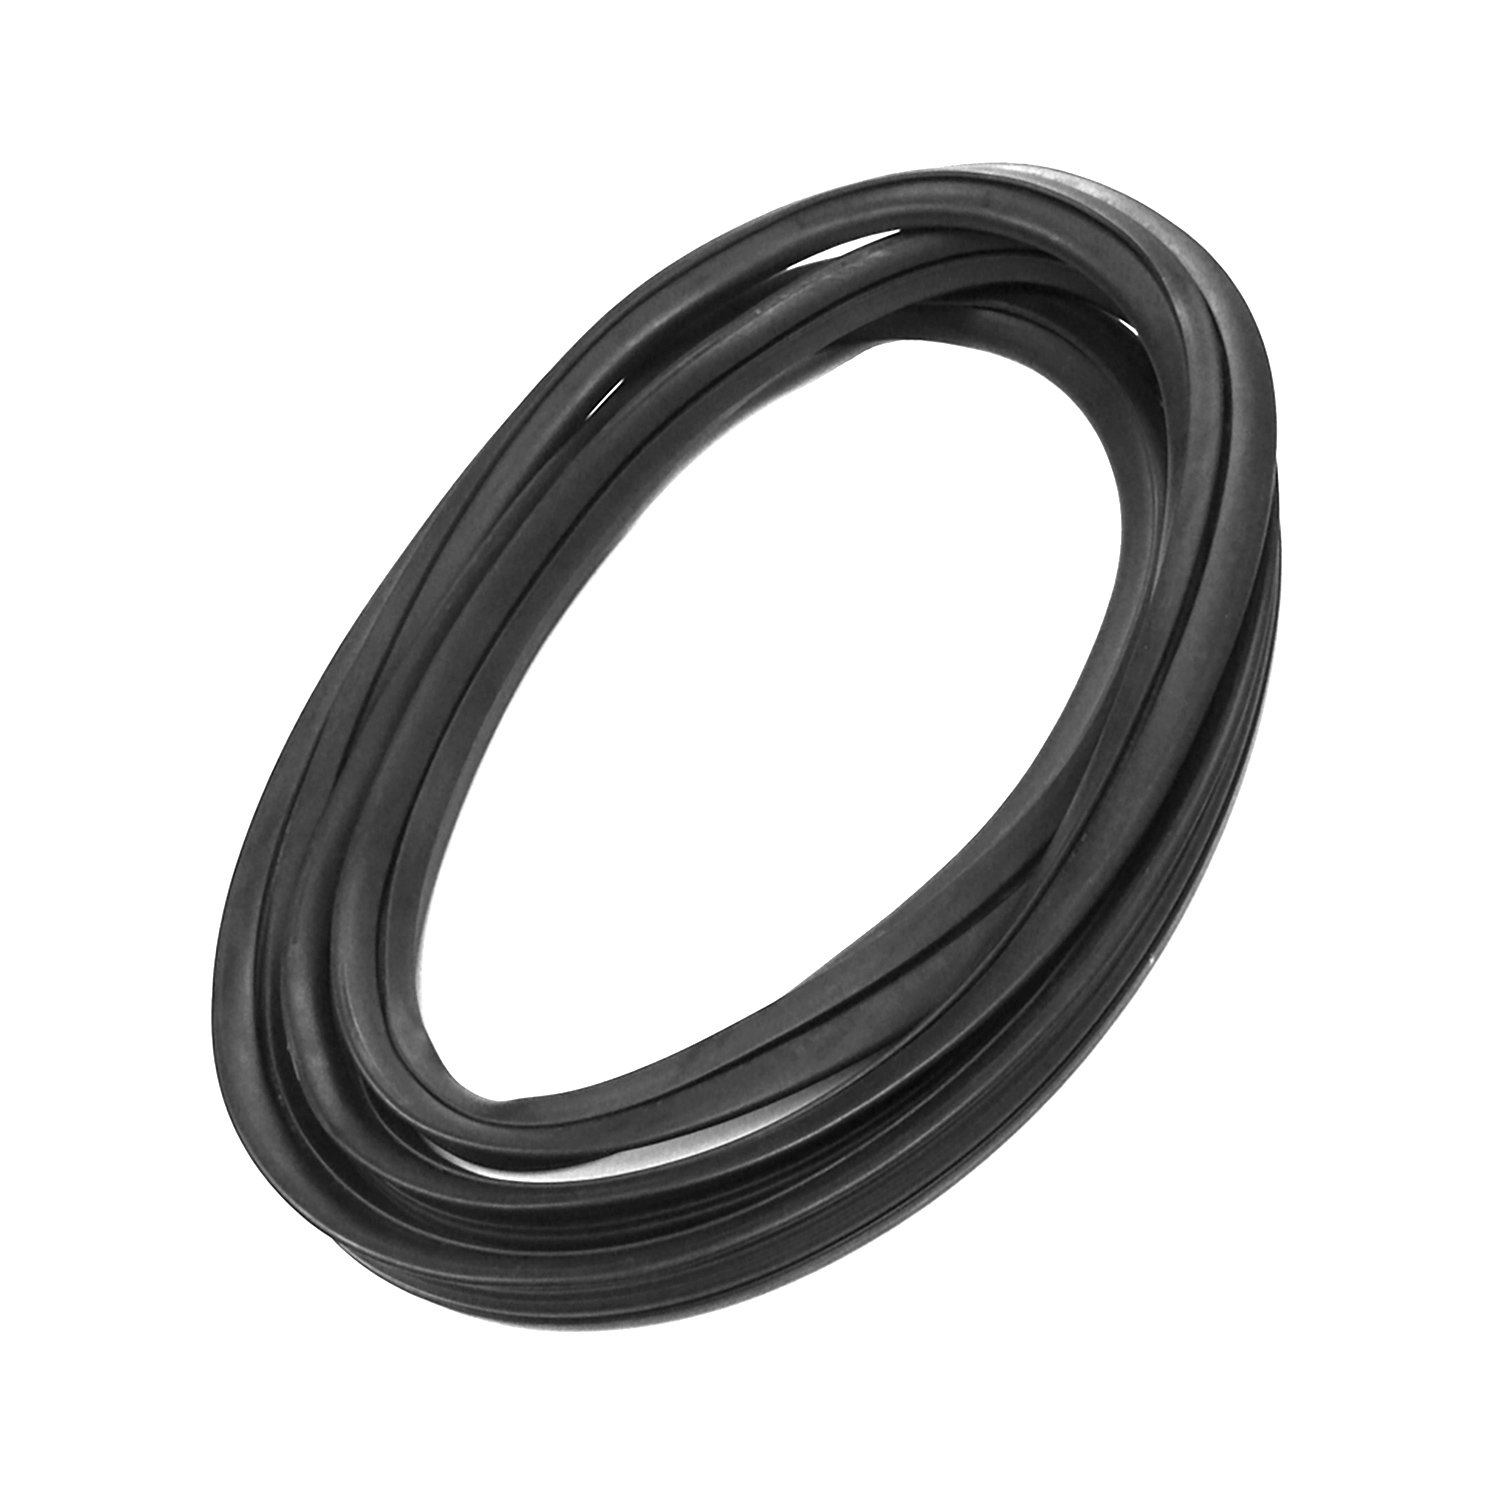 1980 GMC G2500 Windshield Seal, 71-80 GM Full Size Van With Trim Groove, Each-VWS 7324-A